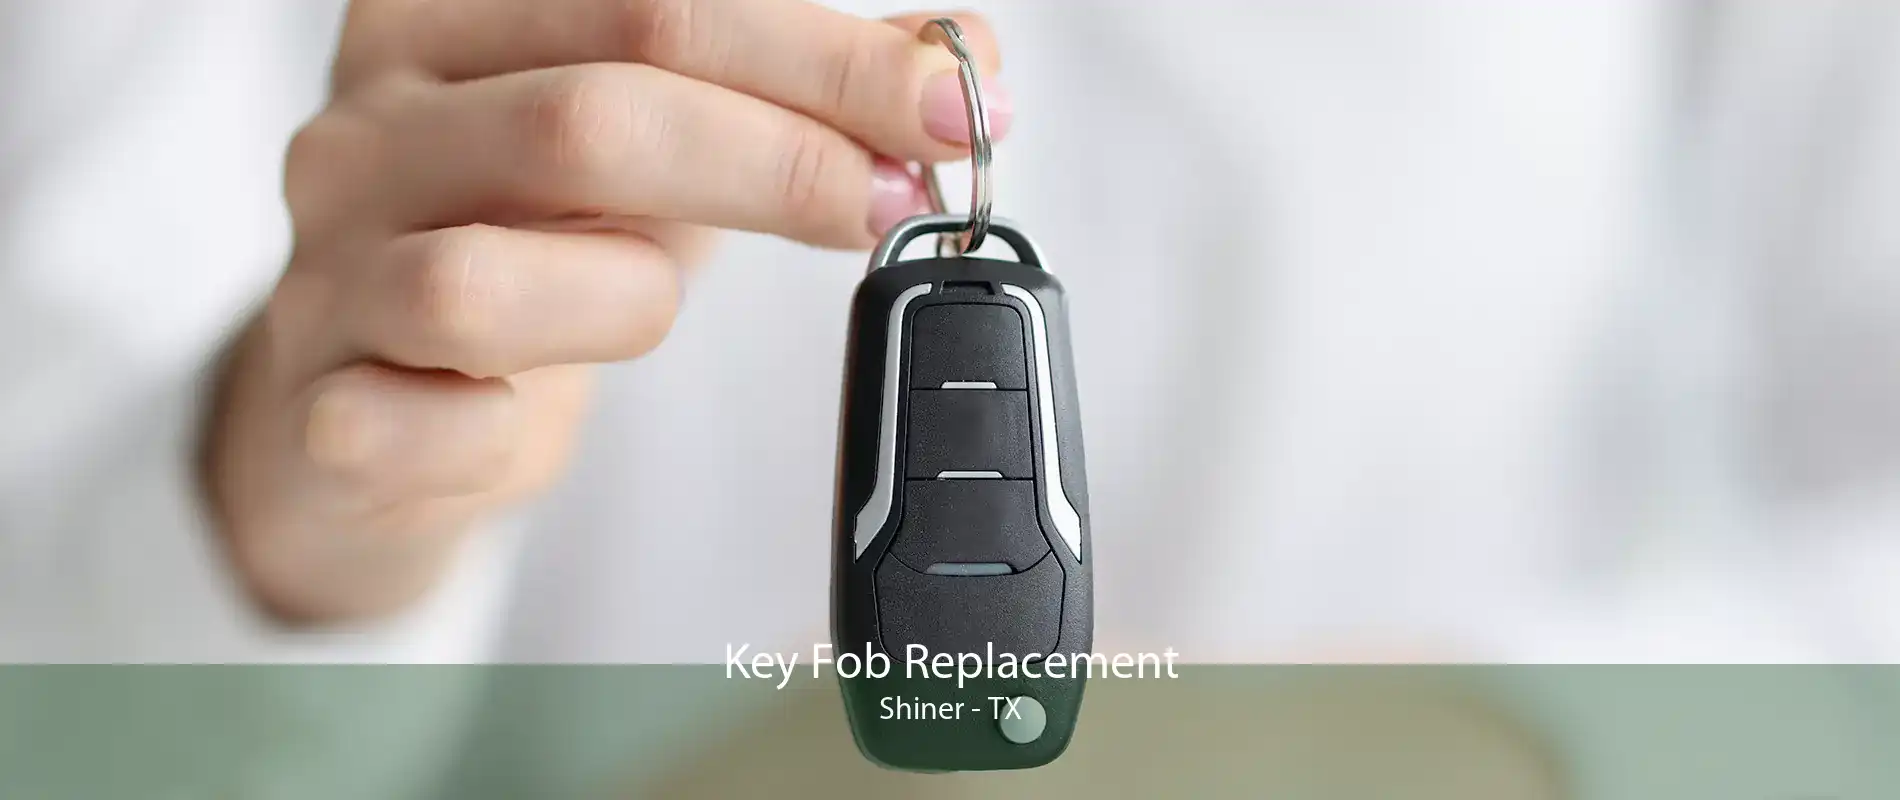 Key Fob Replacement Shiner - TX